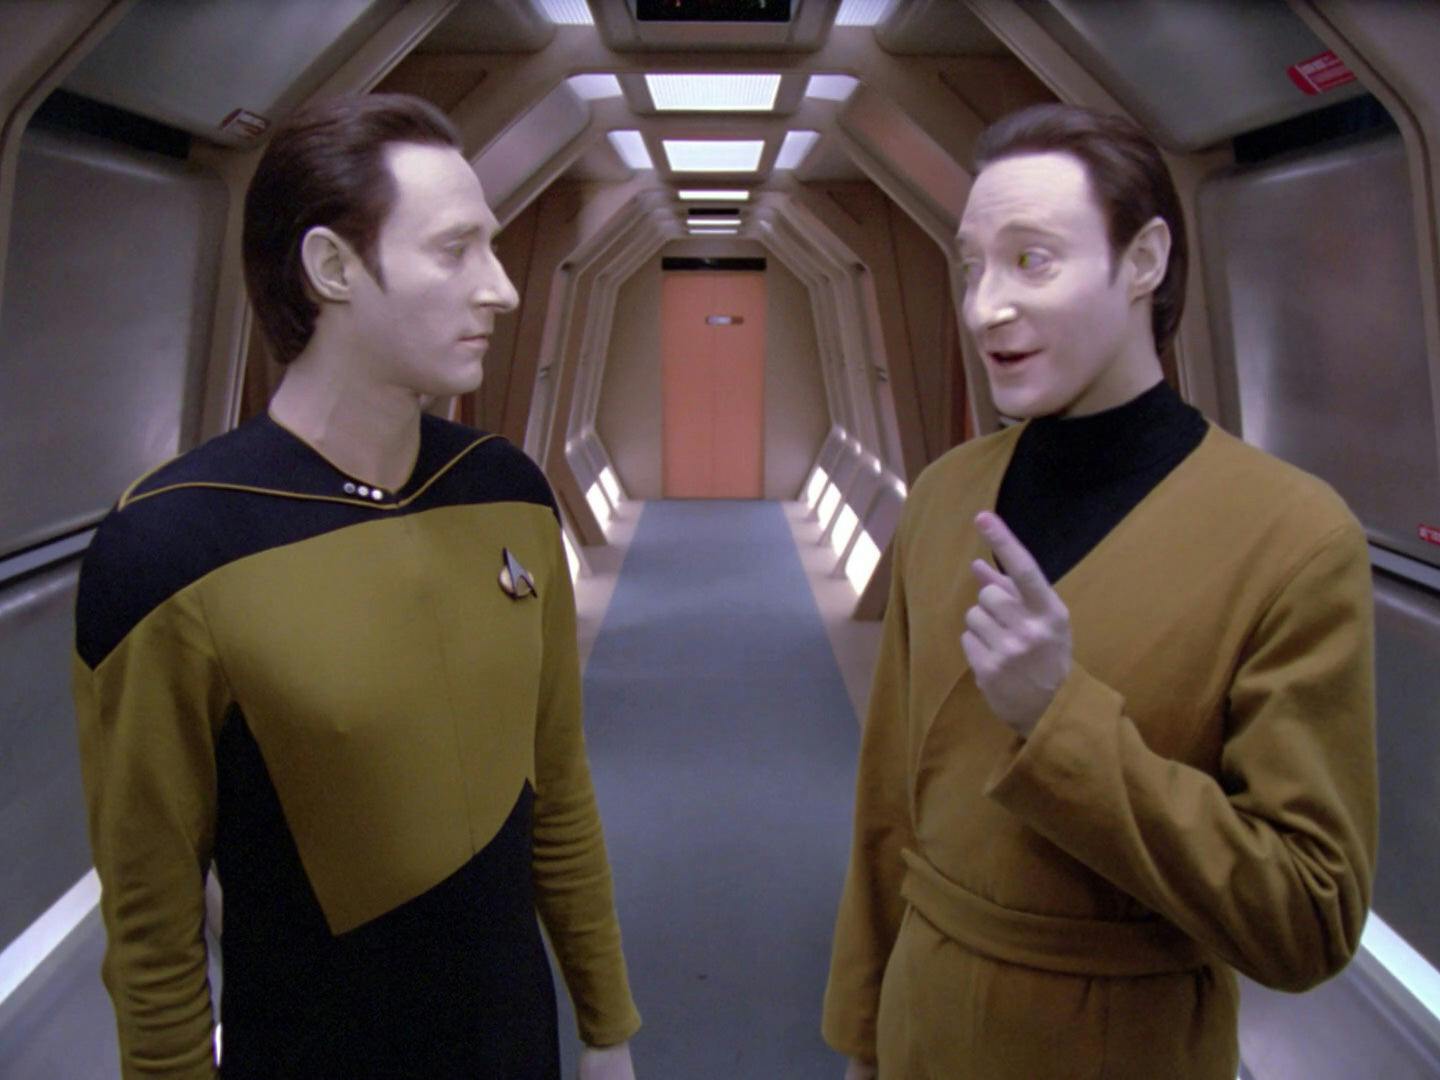 Data and Lore stand in one of the hallways on the Enterprise-D. Data stands to the left, and Lore is on the right. Lore is gesturing and smiling, while Data has a neutral expression in 'Datalore'